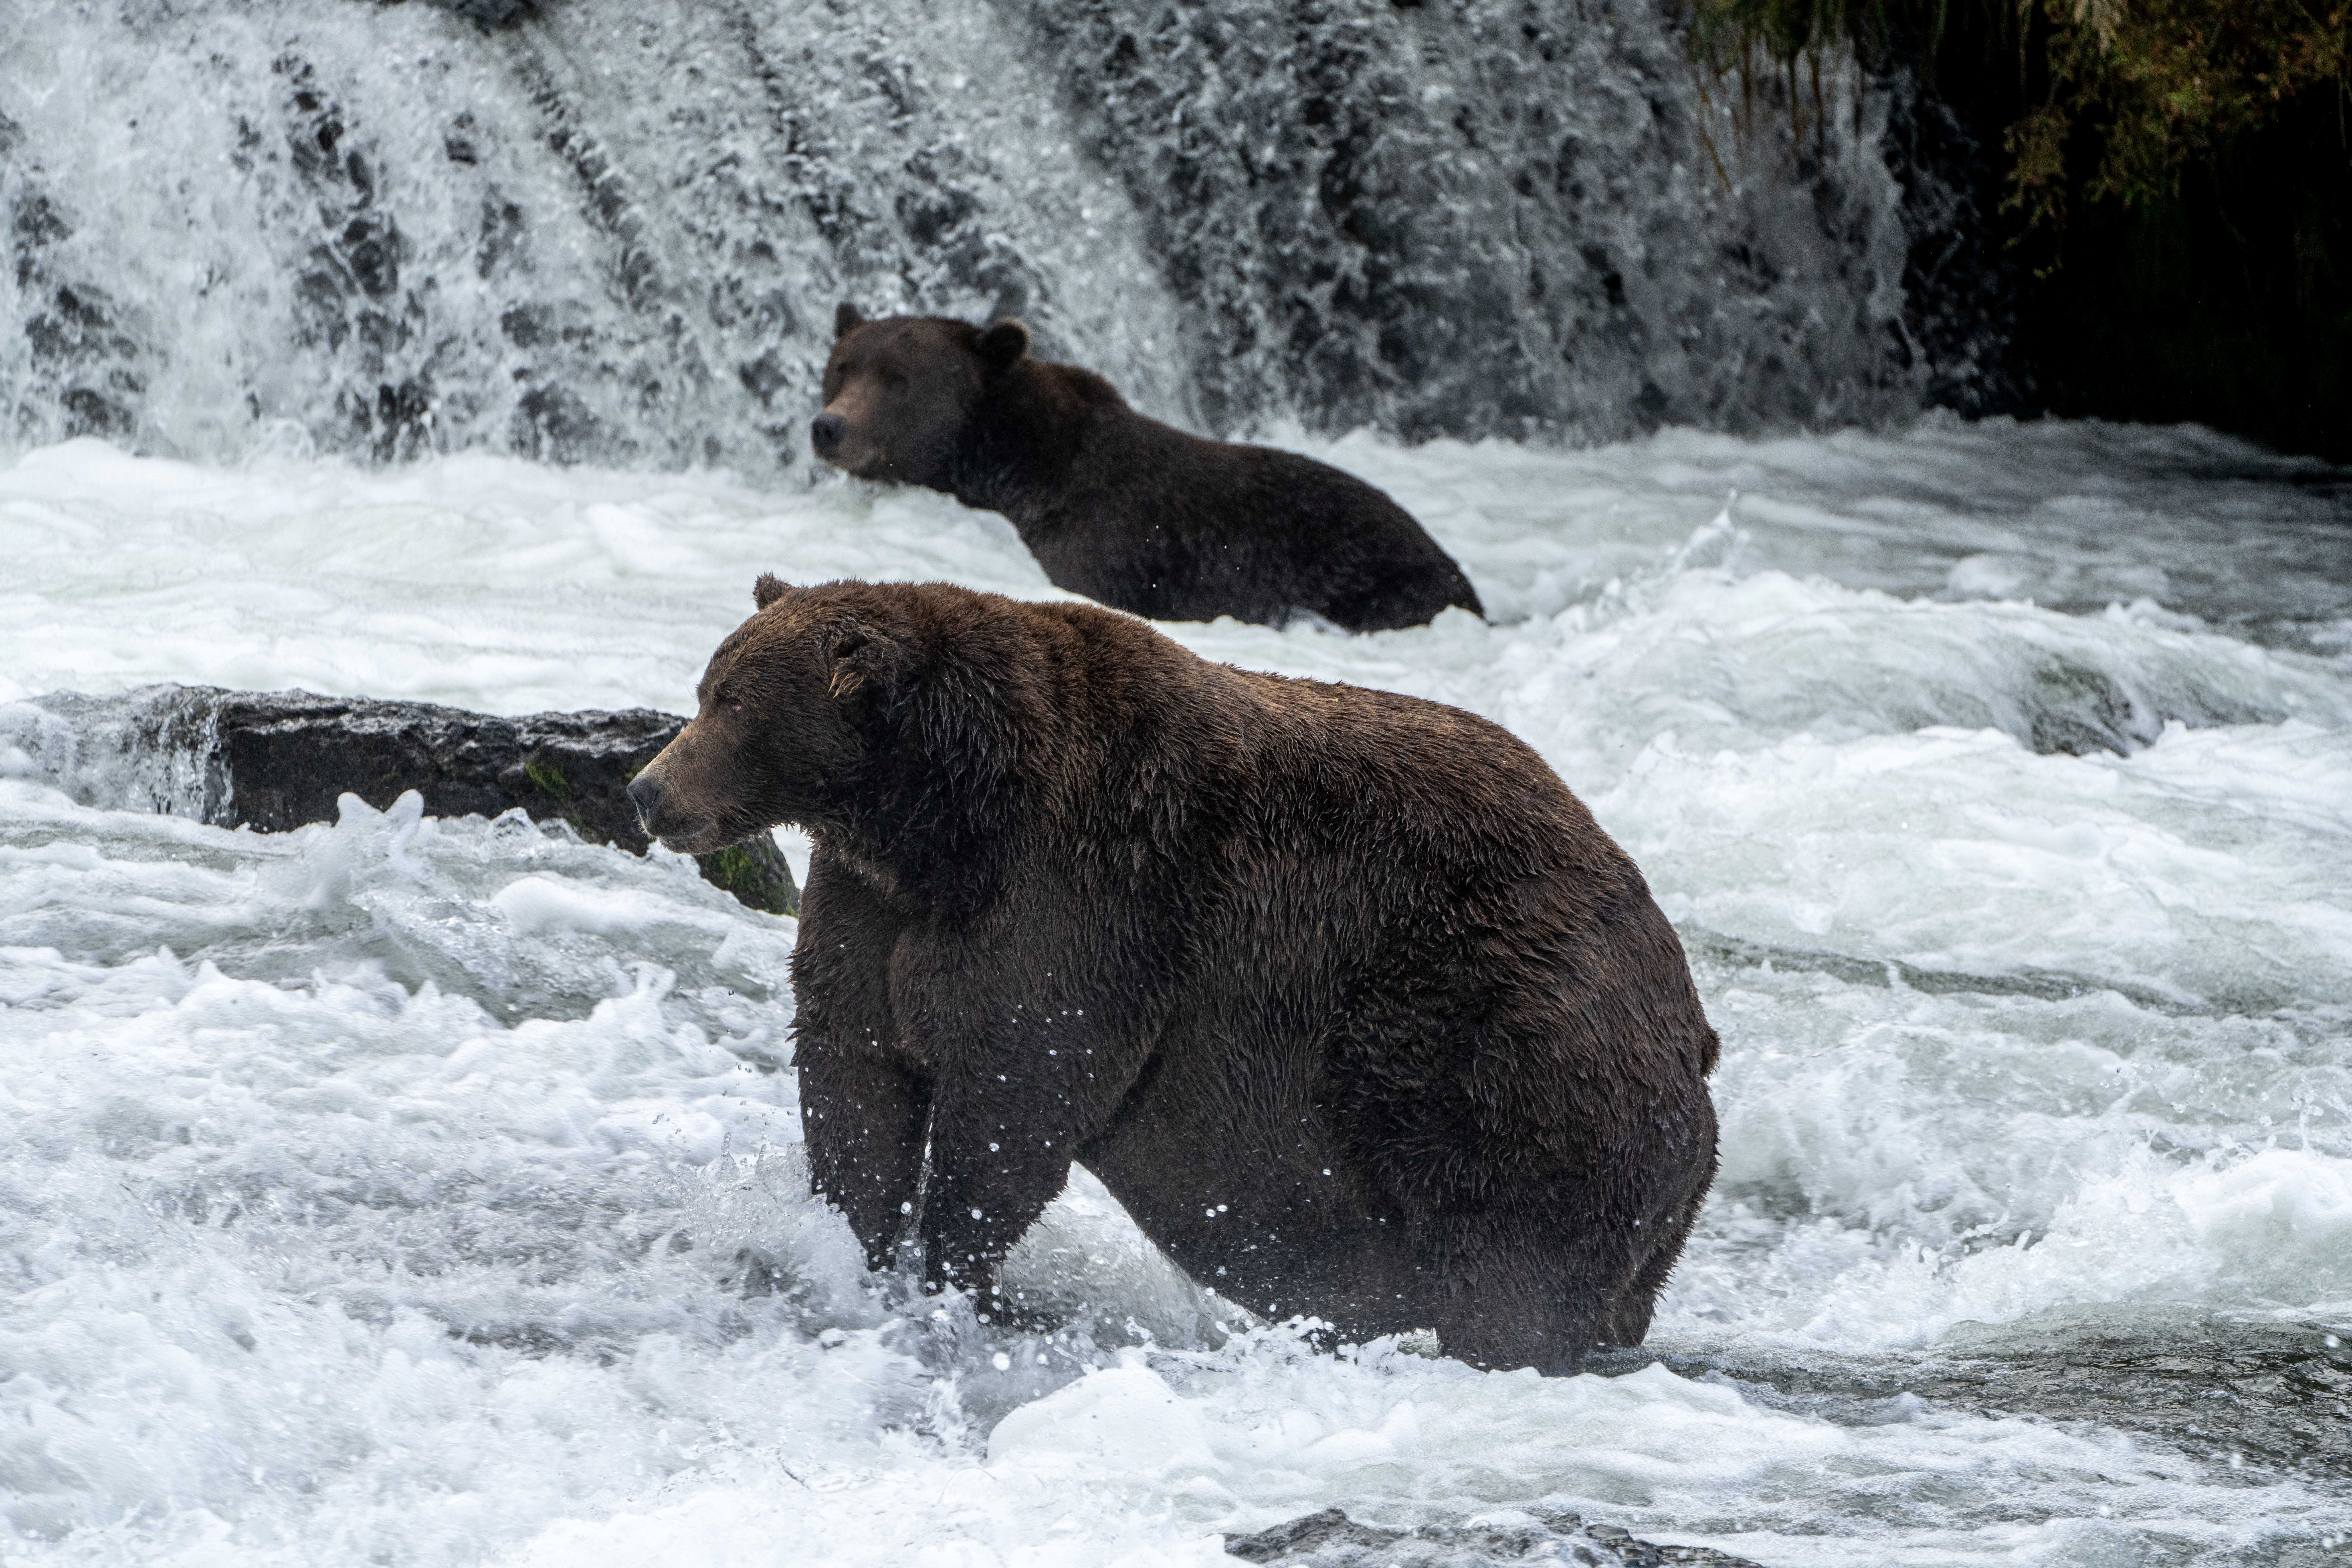 Brown bear 747, the winner of Fat Bear 2020, stands in a river hunting for salmon in Alaska